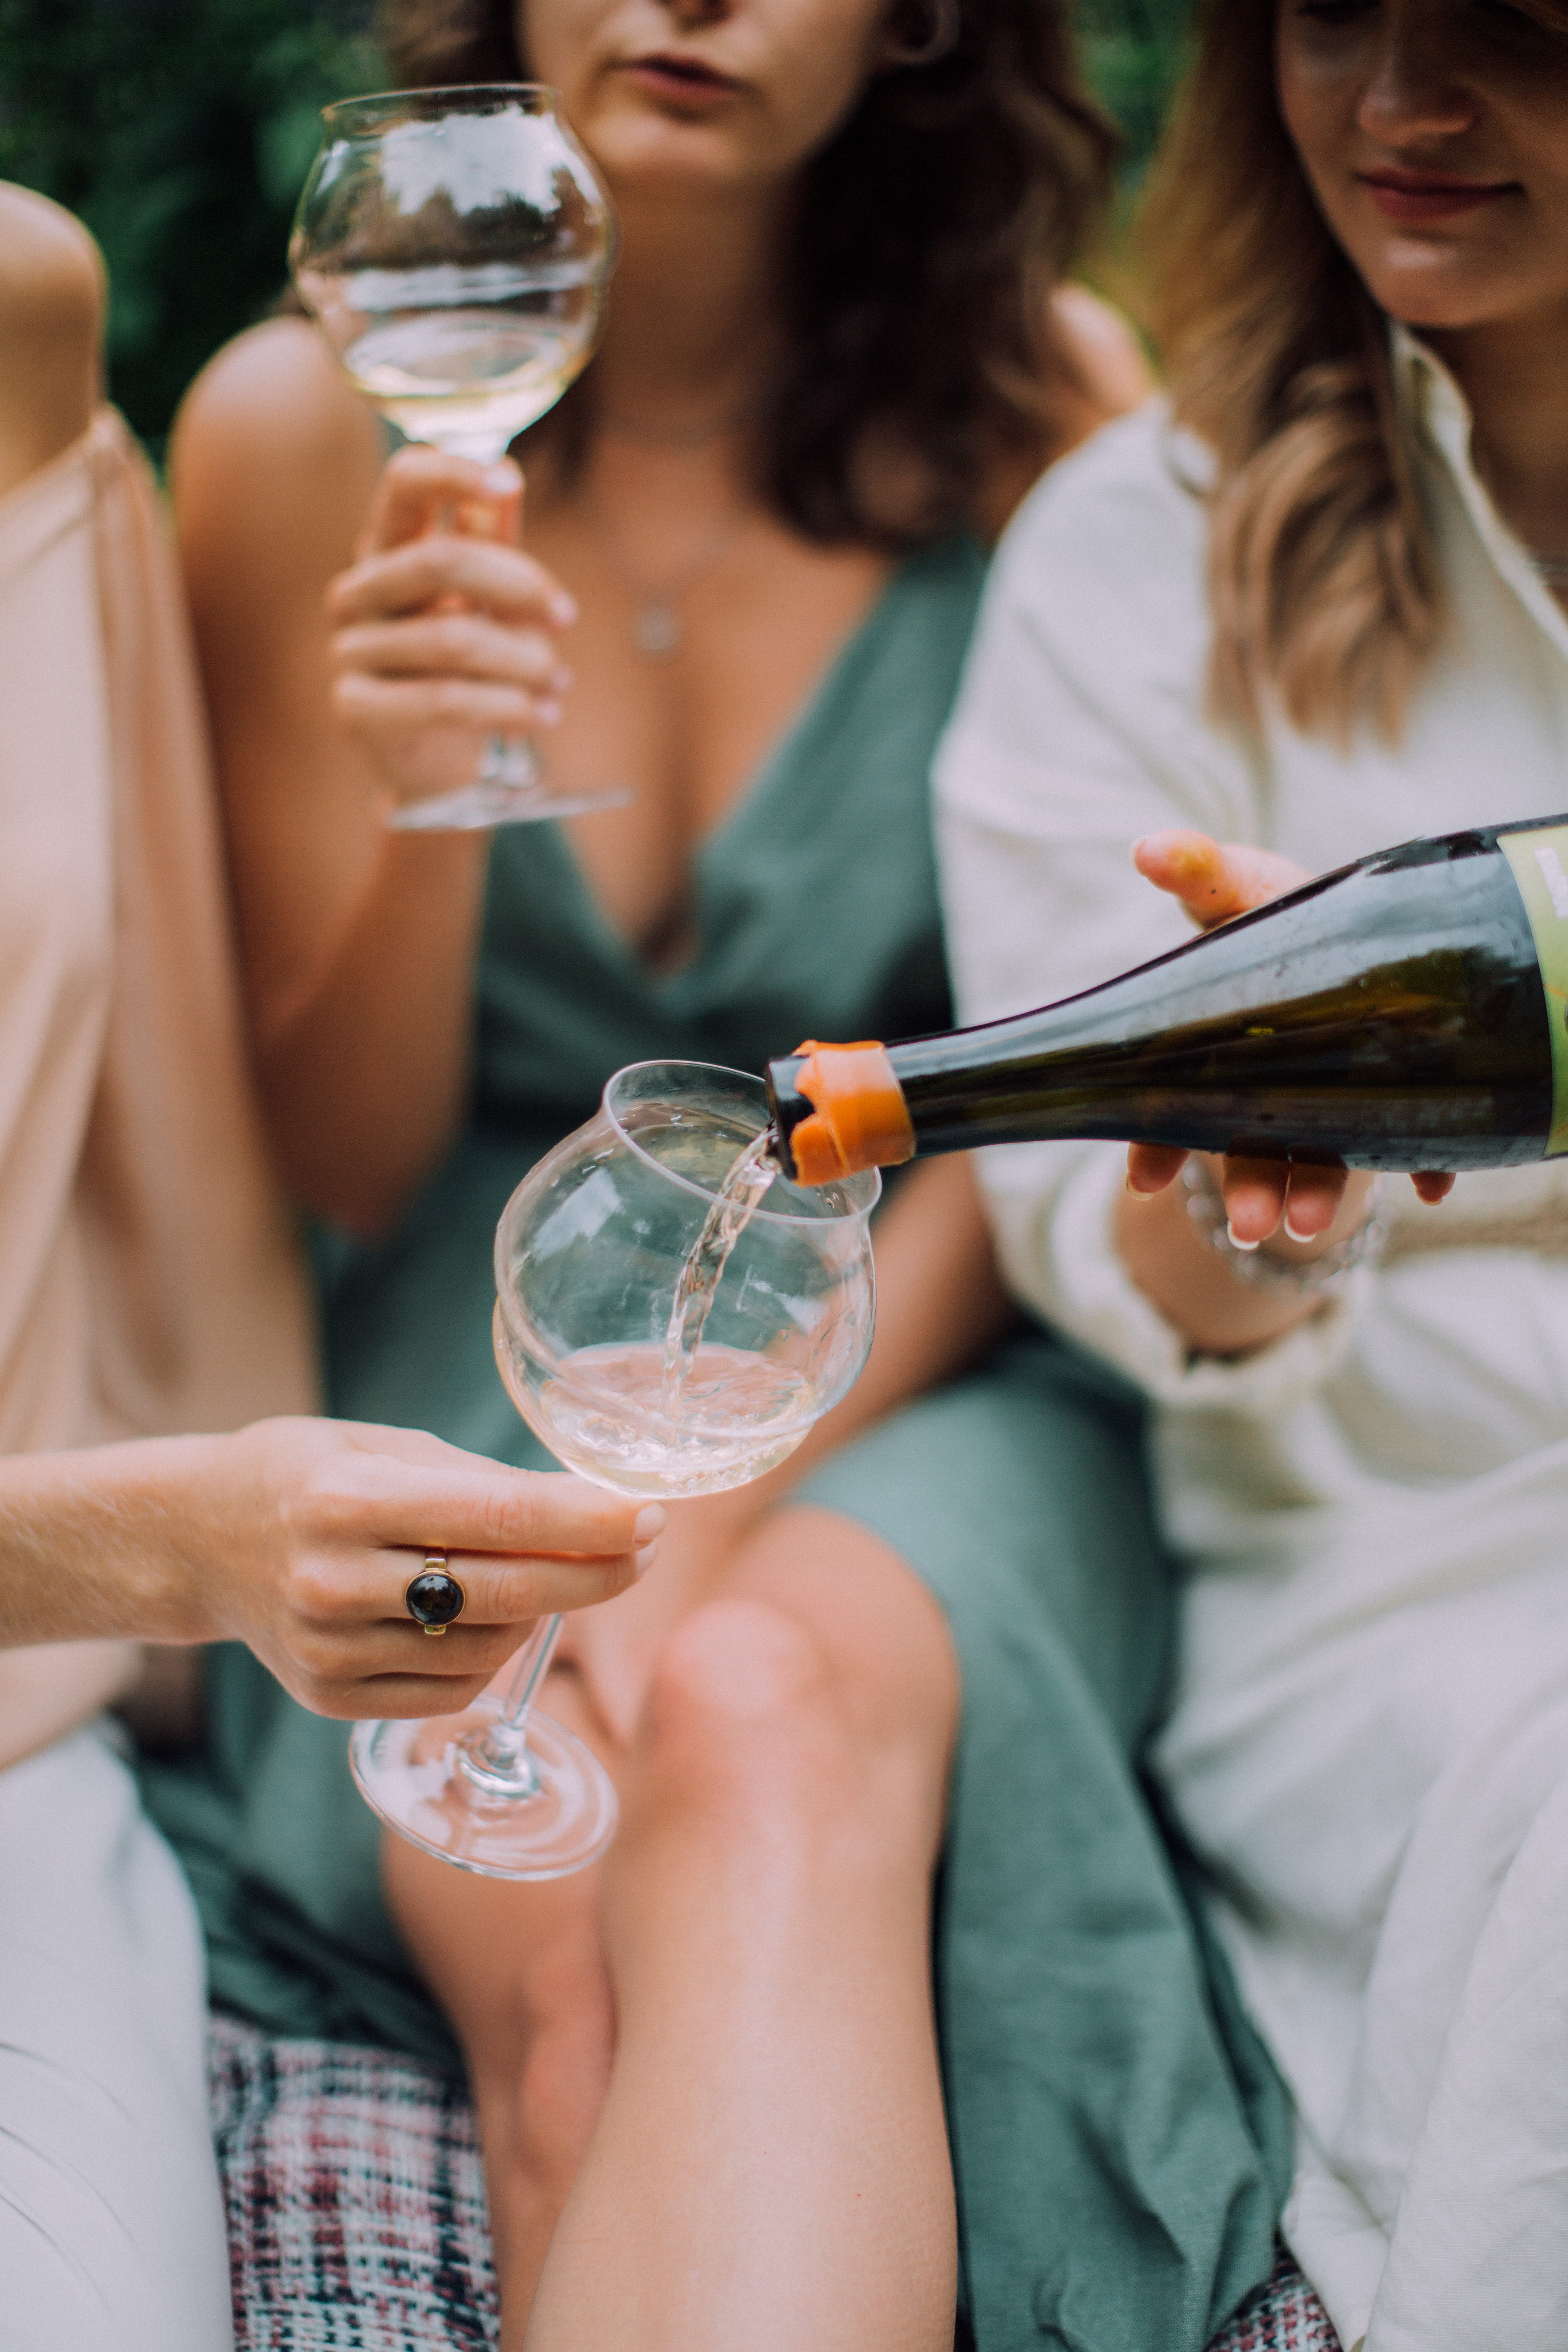 Women drinking wine: Myths and Facts